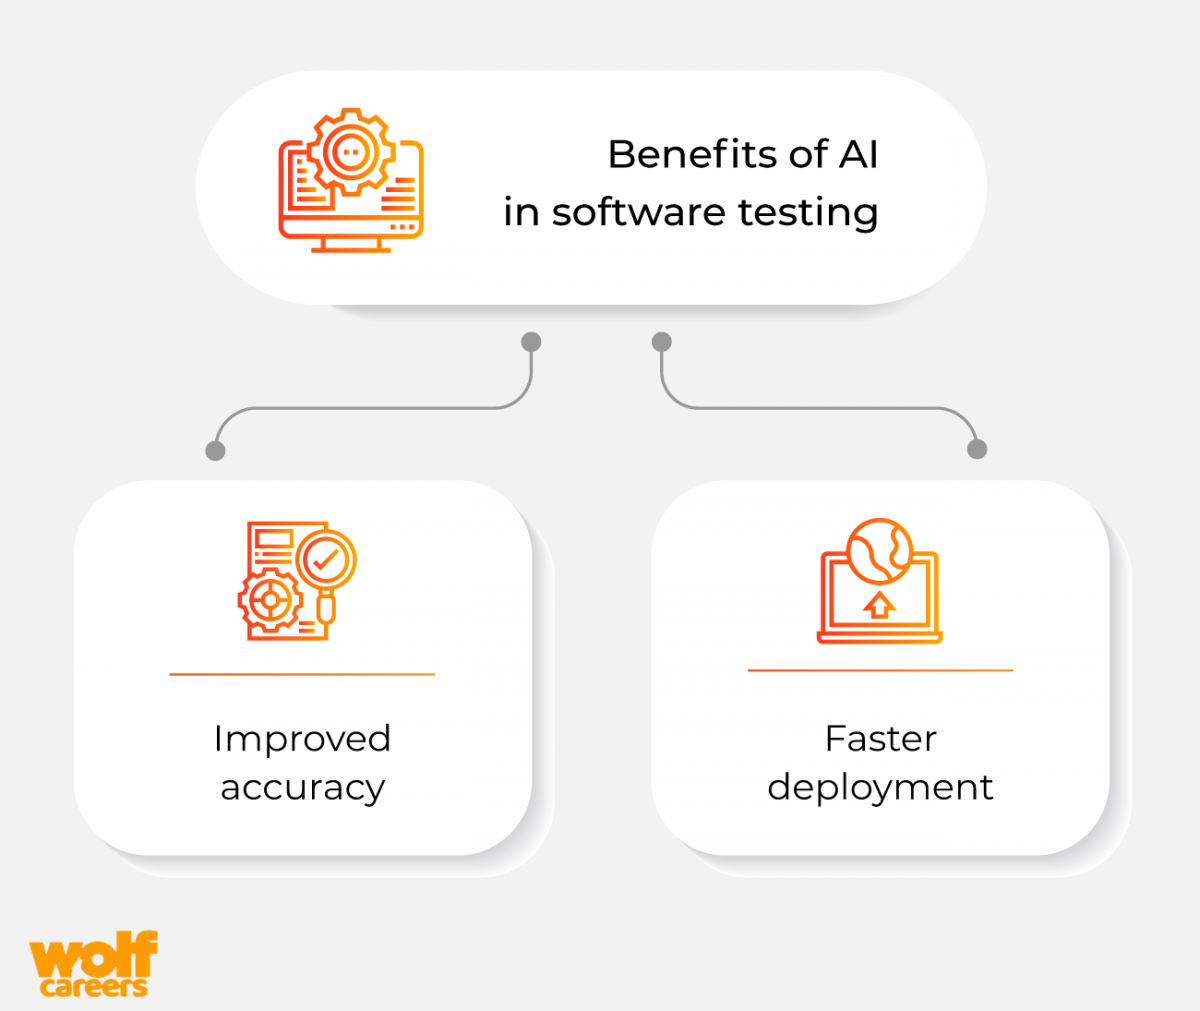 How Is AI Helpful For Software Testing?